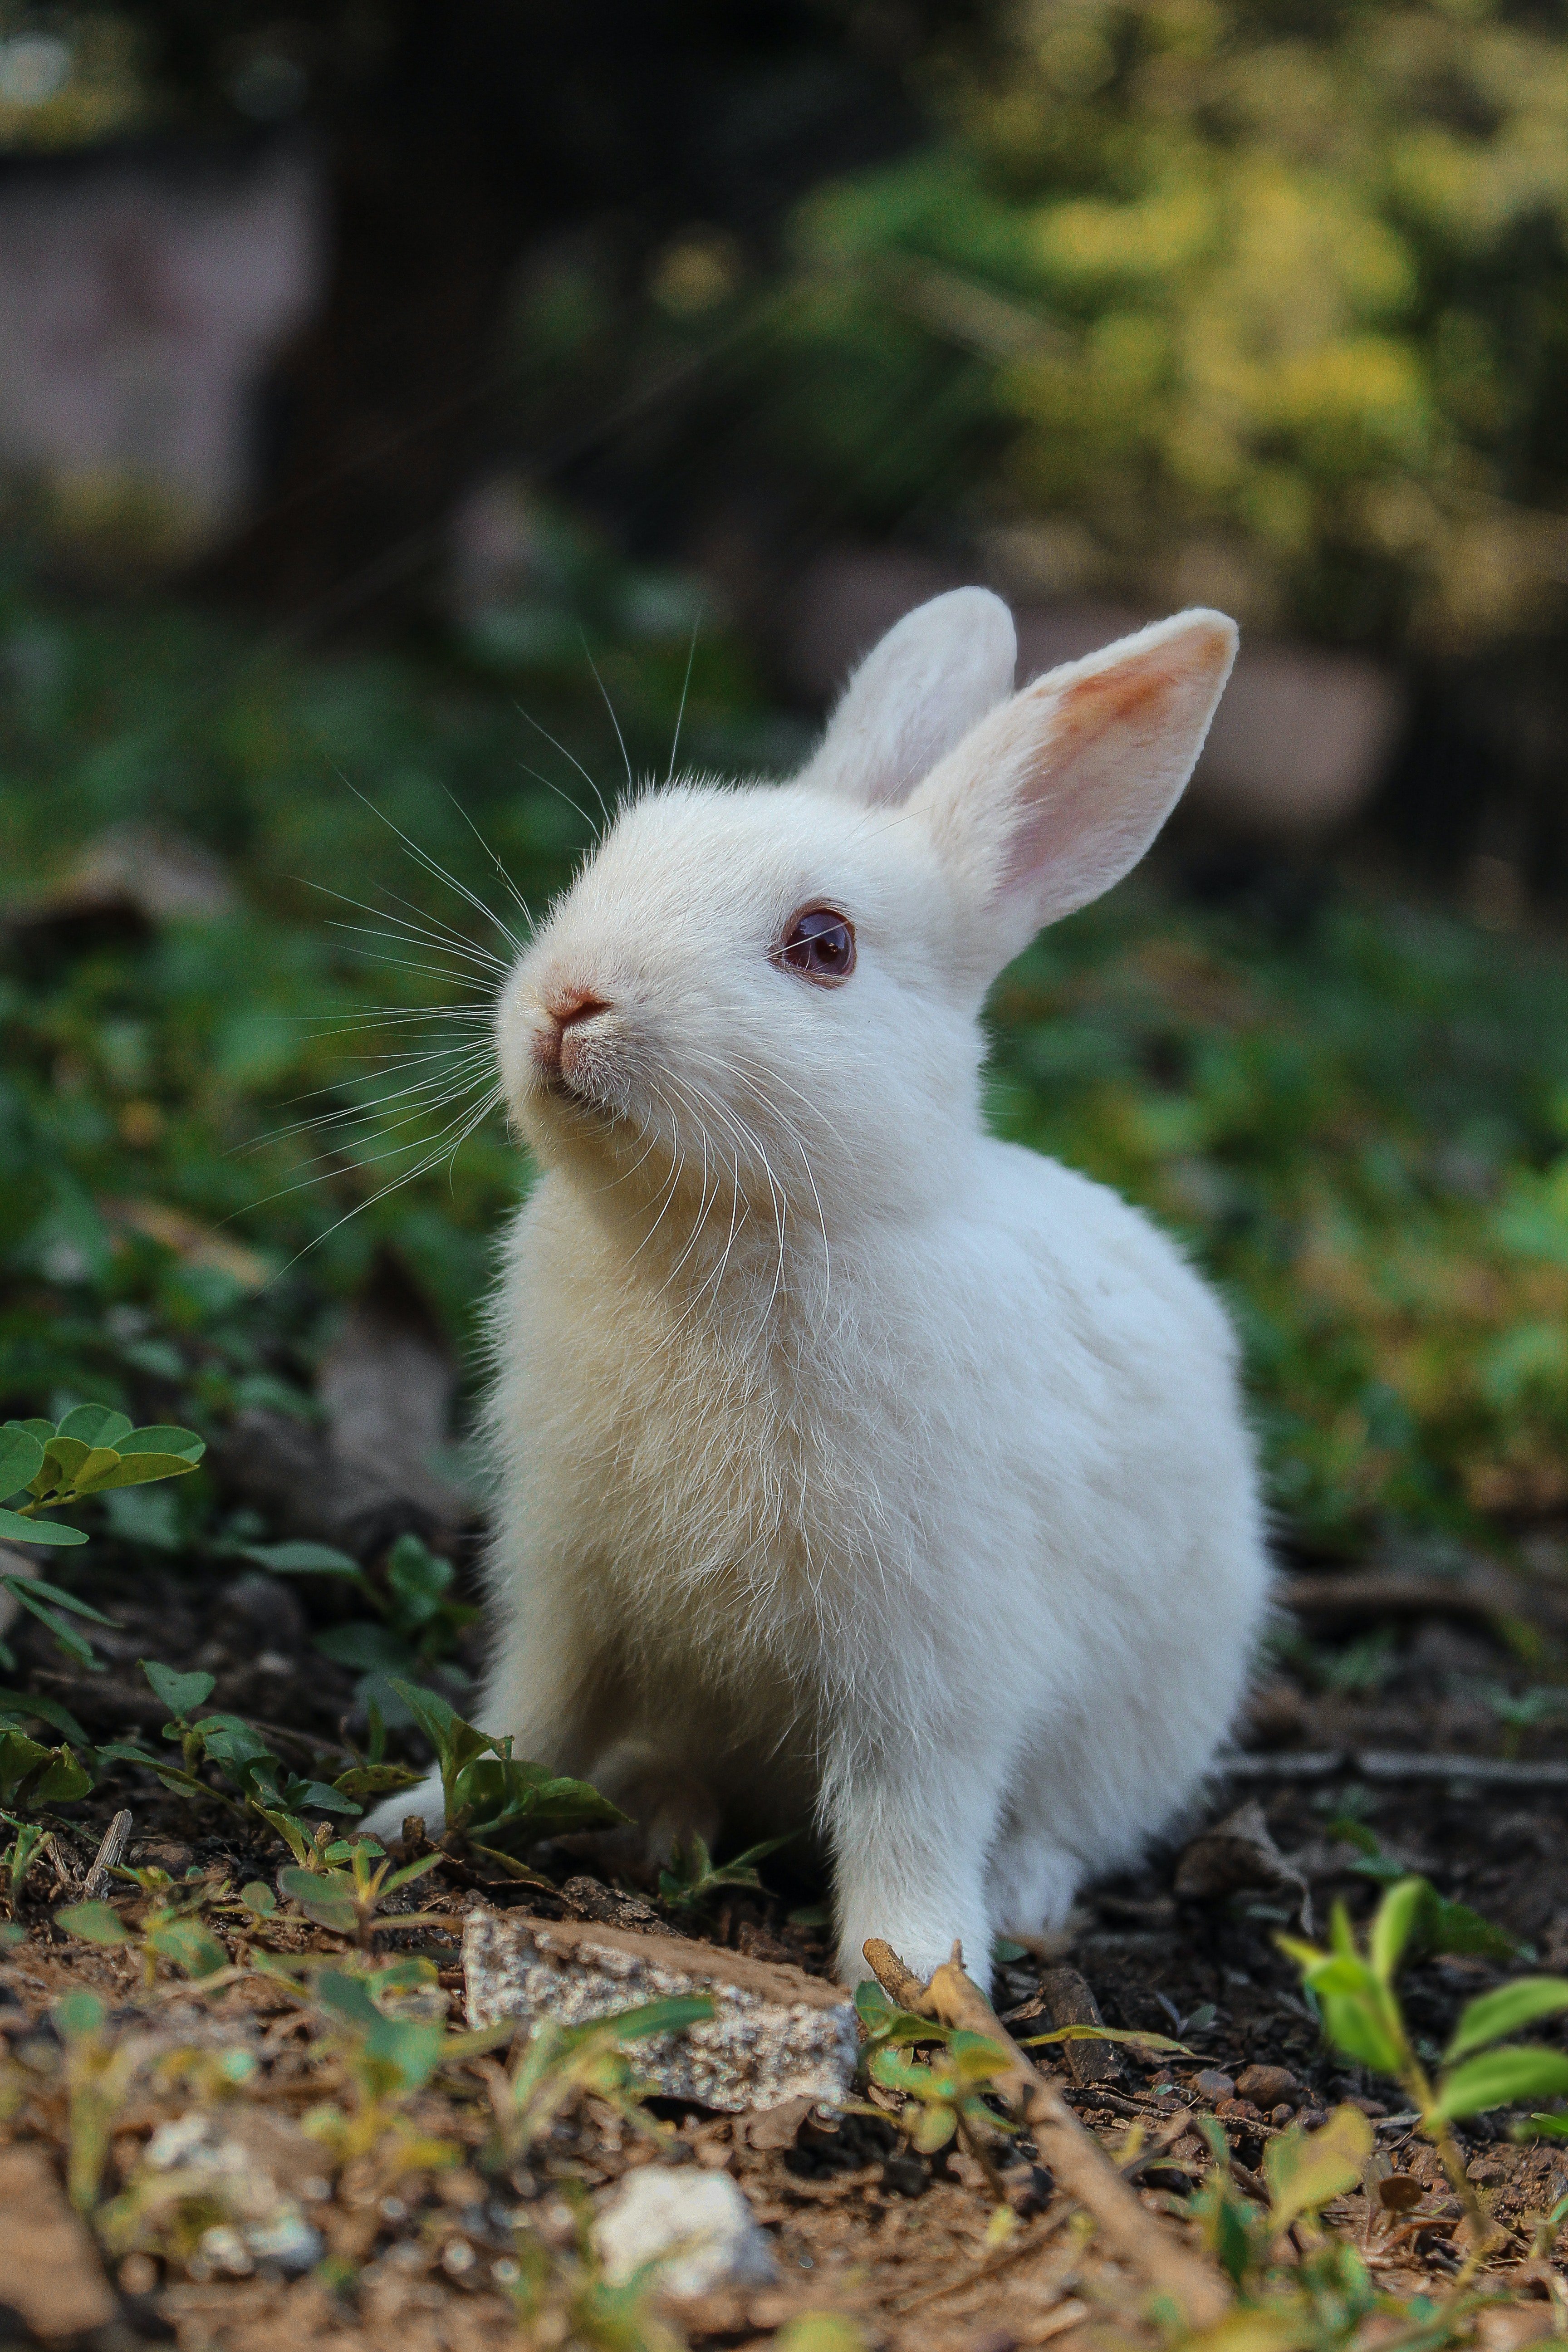 Pictured - A white rabbit on green grass | Source: Pexels 